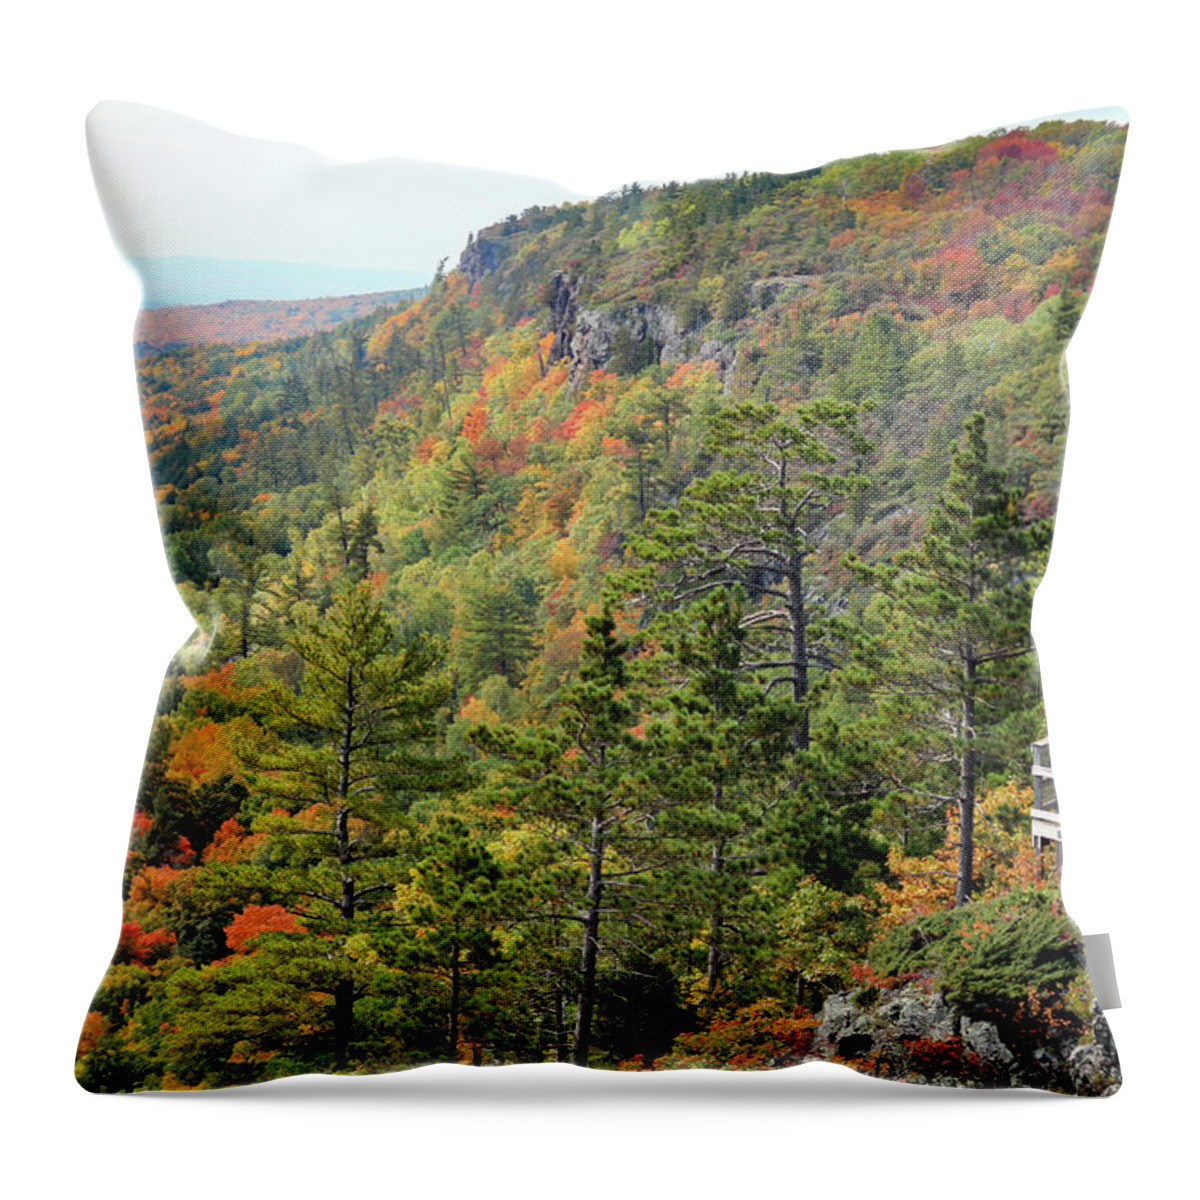 Porcupine Mountains Wilderness State Park Throw Pillow featuring the photograph The Viewing Platform by Robert Carter